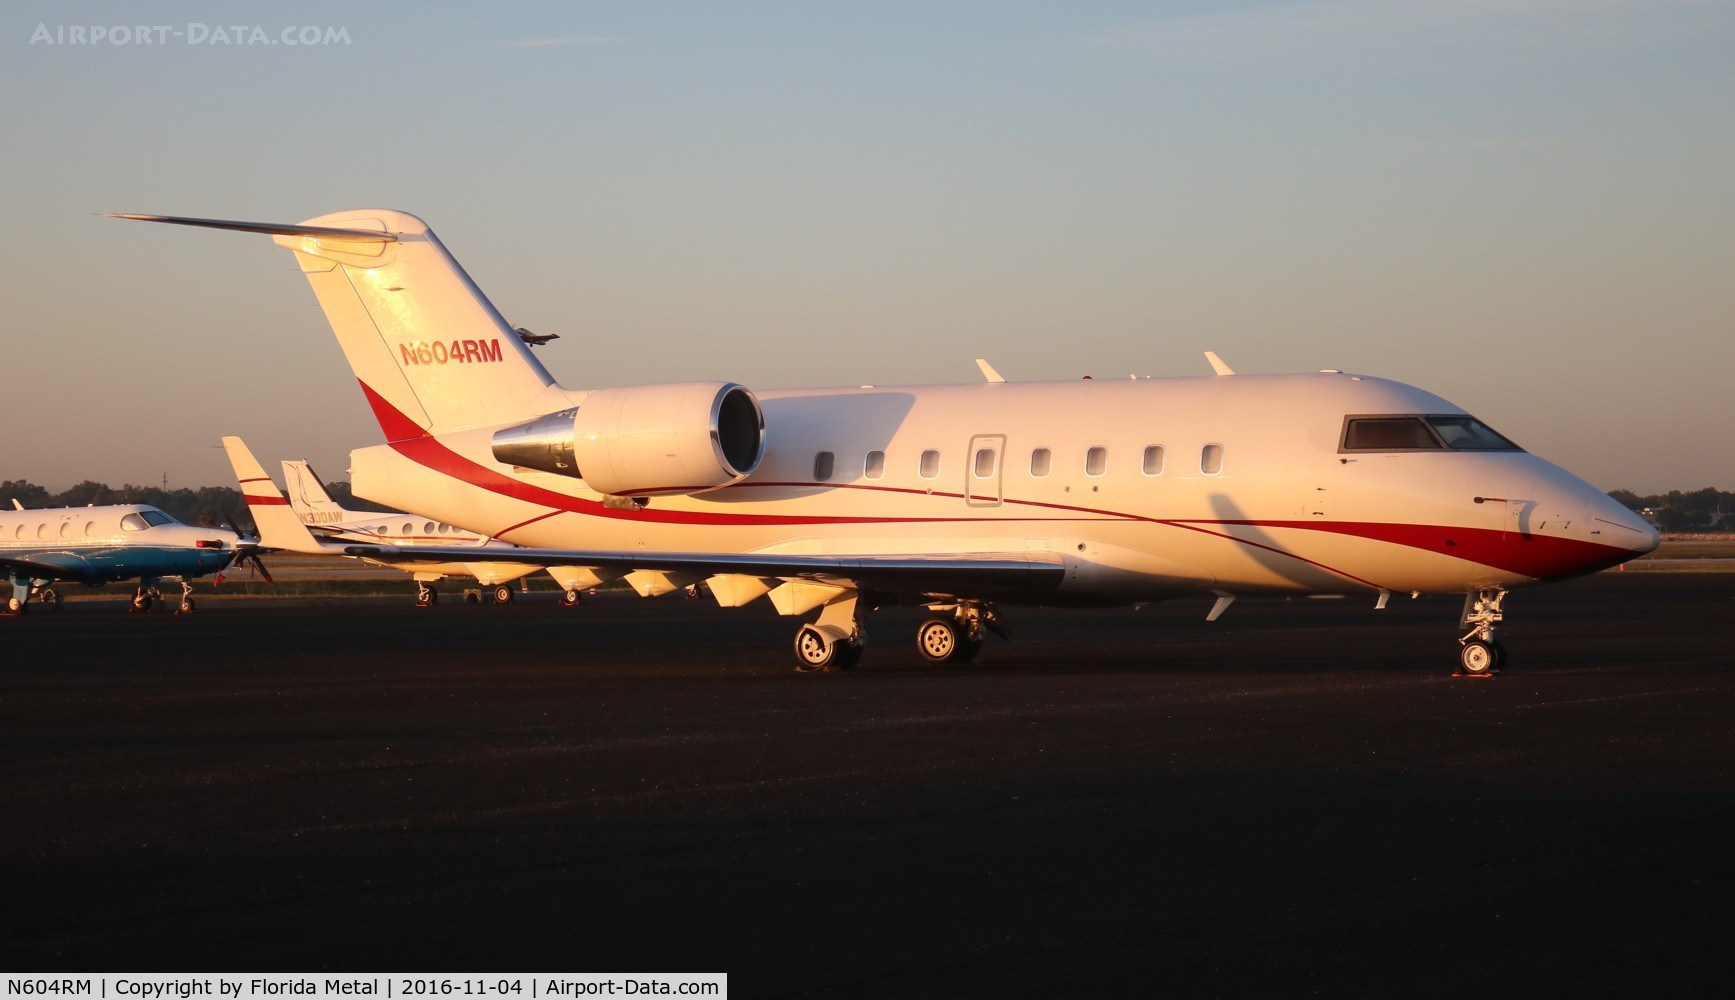 N604RM, 2000 Bombardier Challenger 604 (CL-600-2B16) C/N 5441, Challenger 604